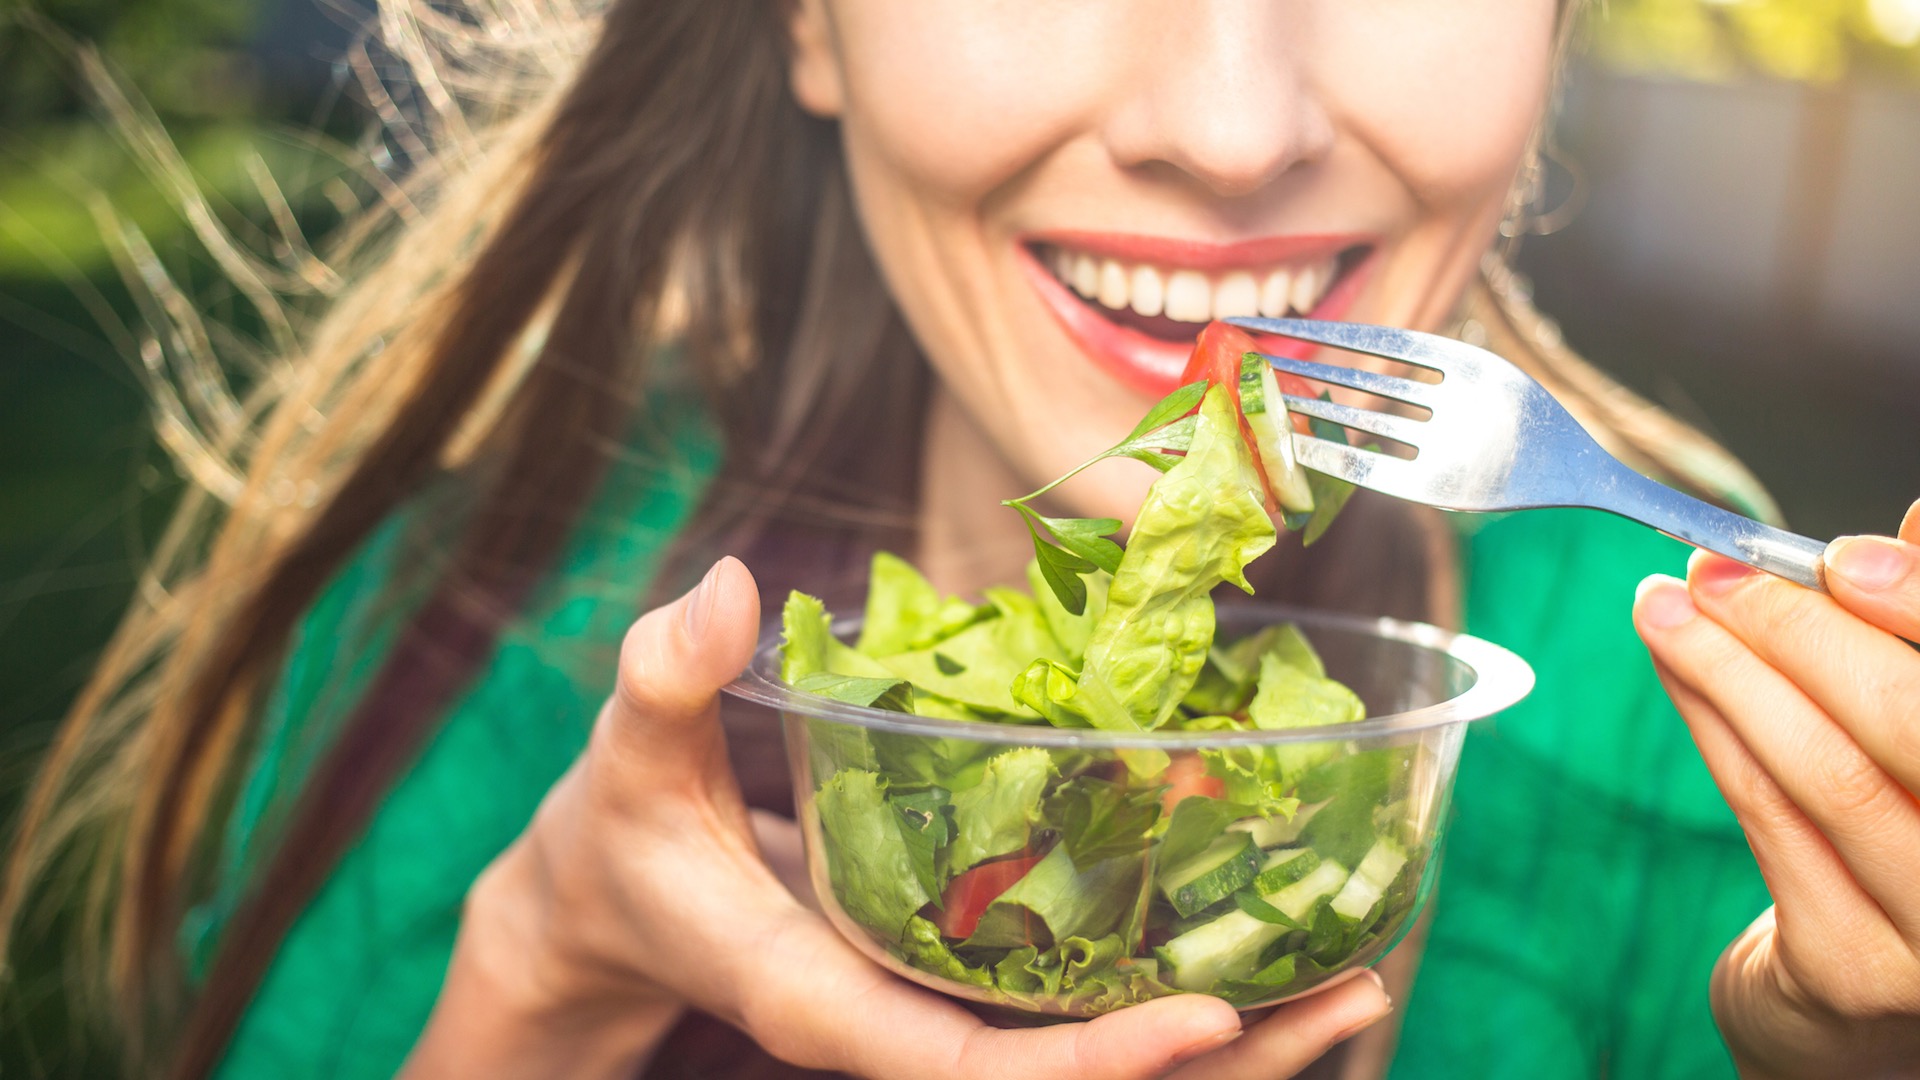 Plant-based eating for optimal wellness and performance